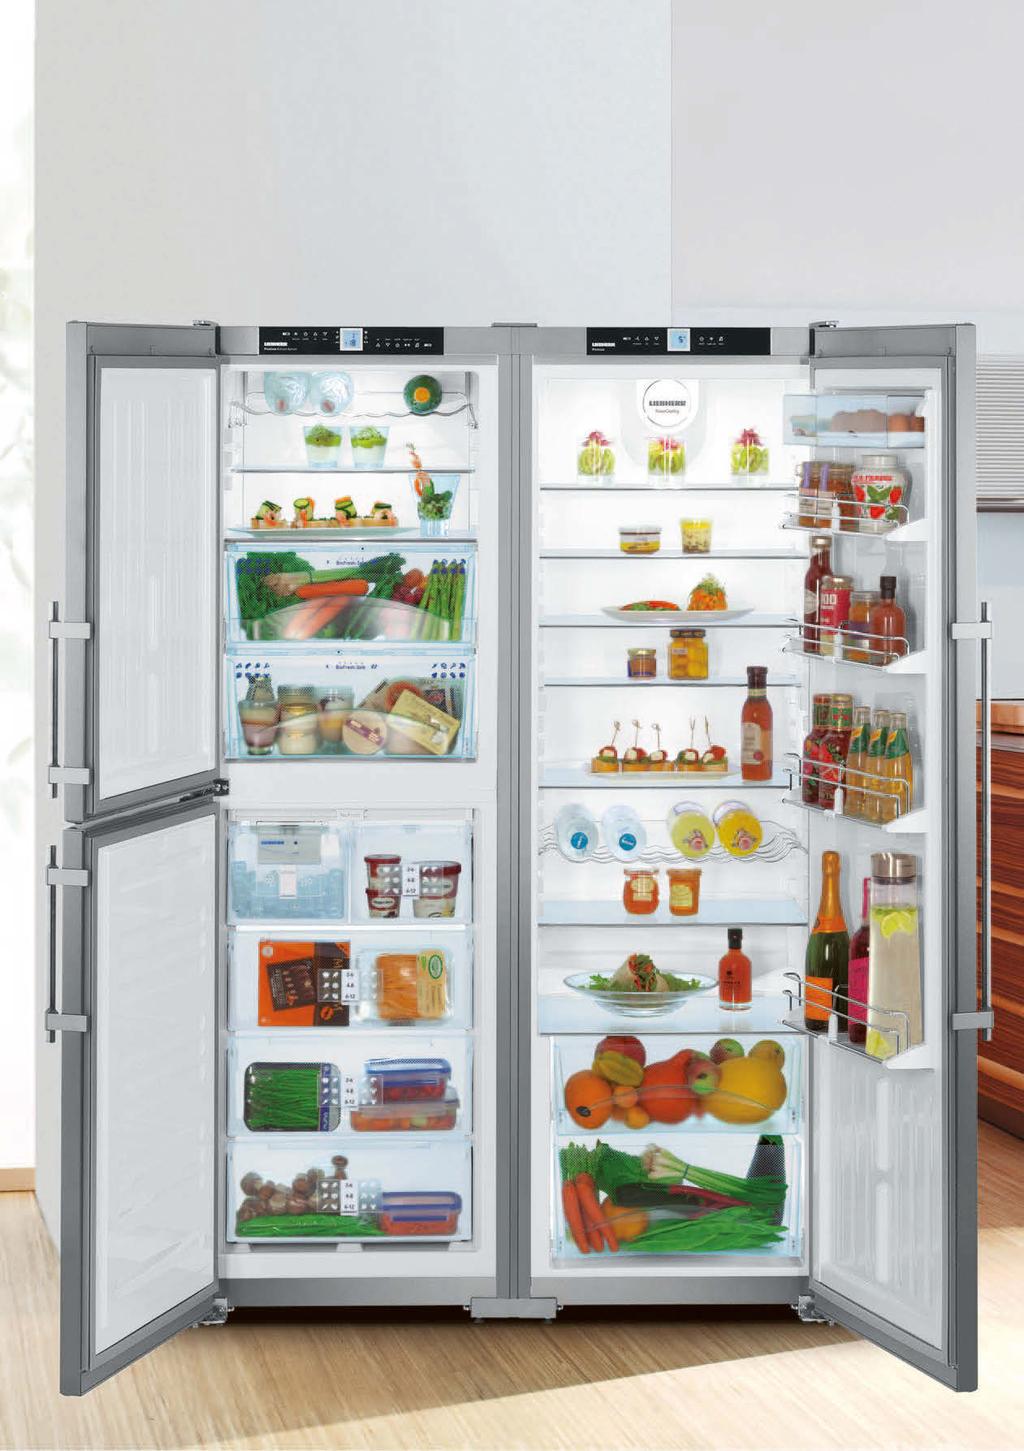 The Side-by-Side fridge-freezer with extra large BioFresh compartment: SBSes 7353 Apart from a spacious refrigerator compartment, the Side-by-Side fridge-freezer SBSes 7353 also offers two large